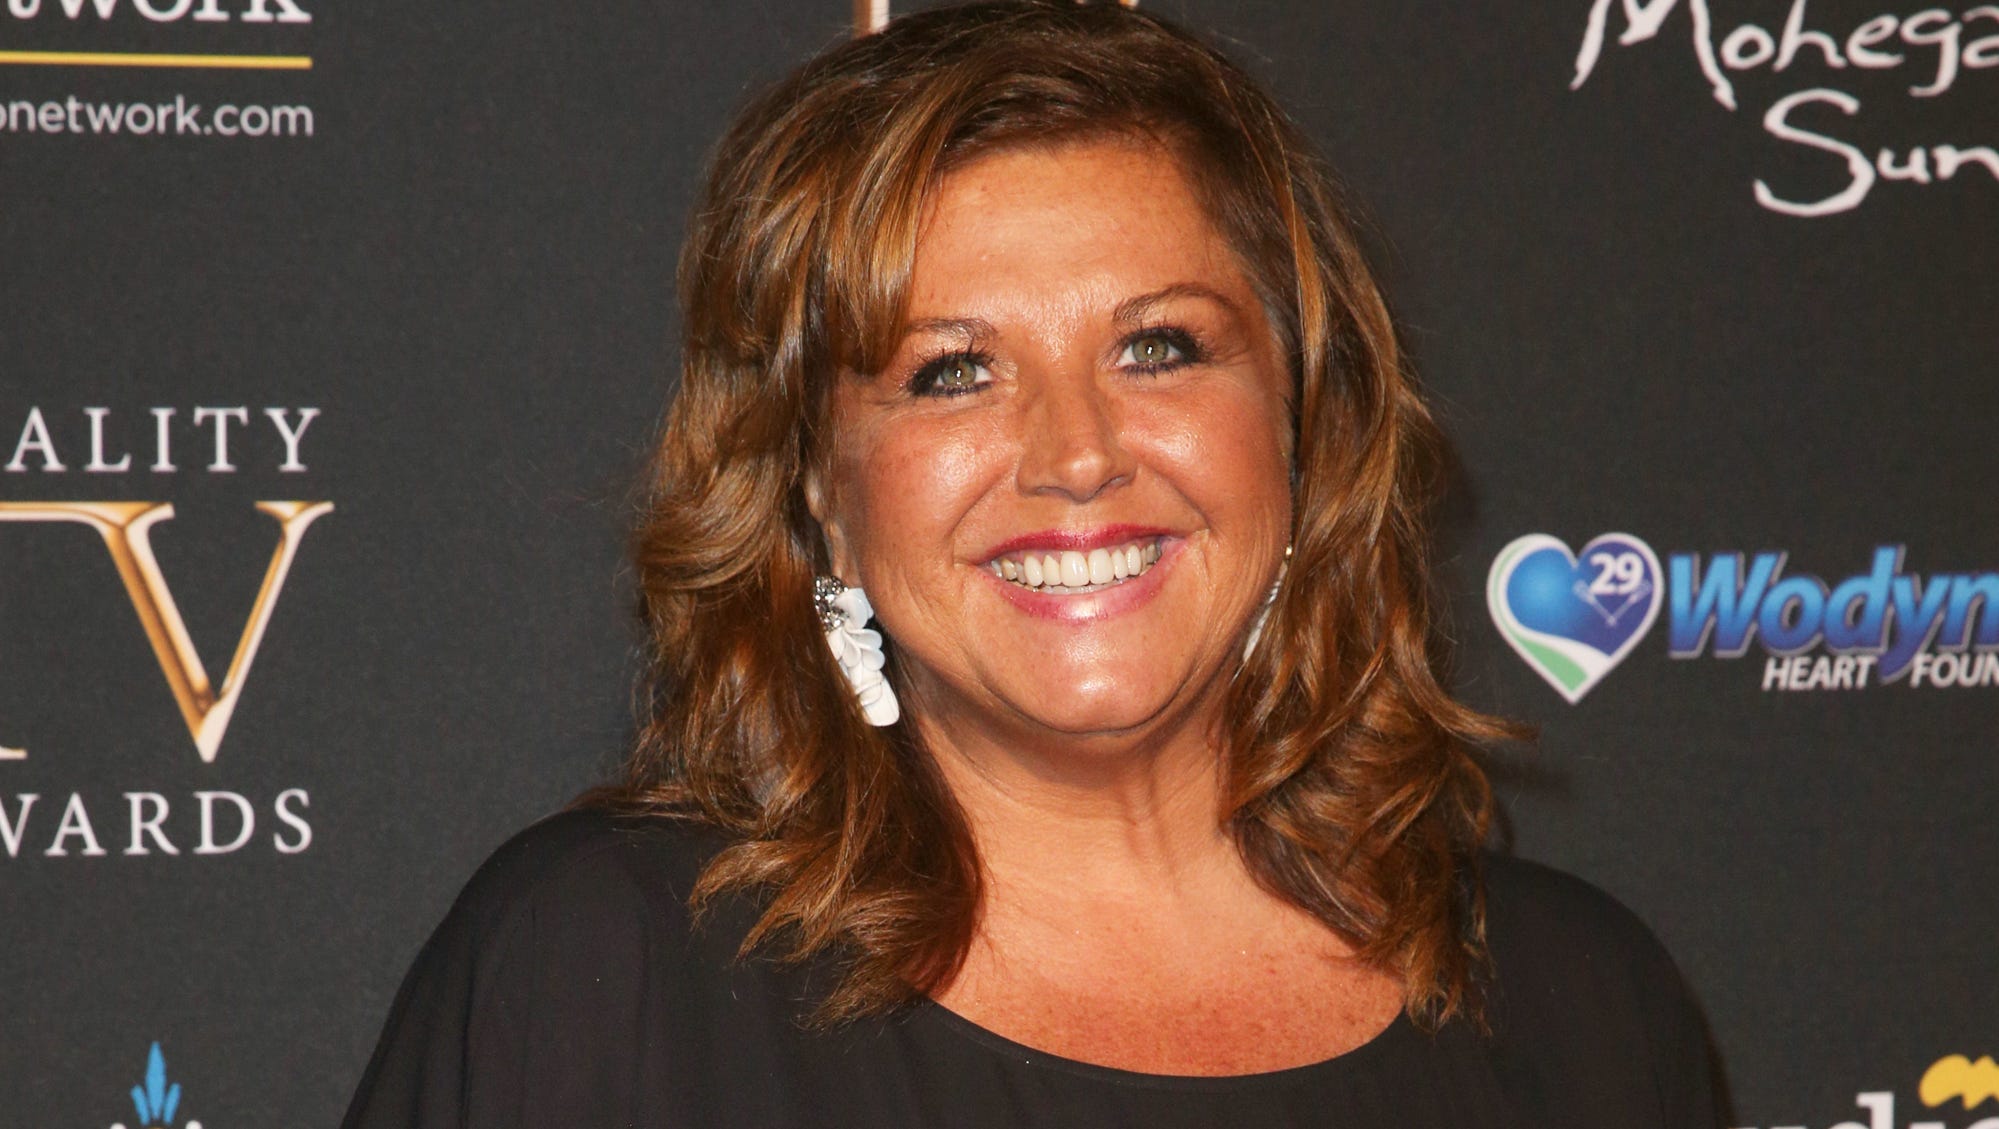 Abby Lee Miller shares her prison fears on 'Lifetime' tell-all special